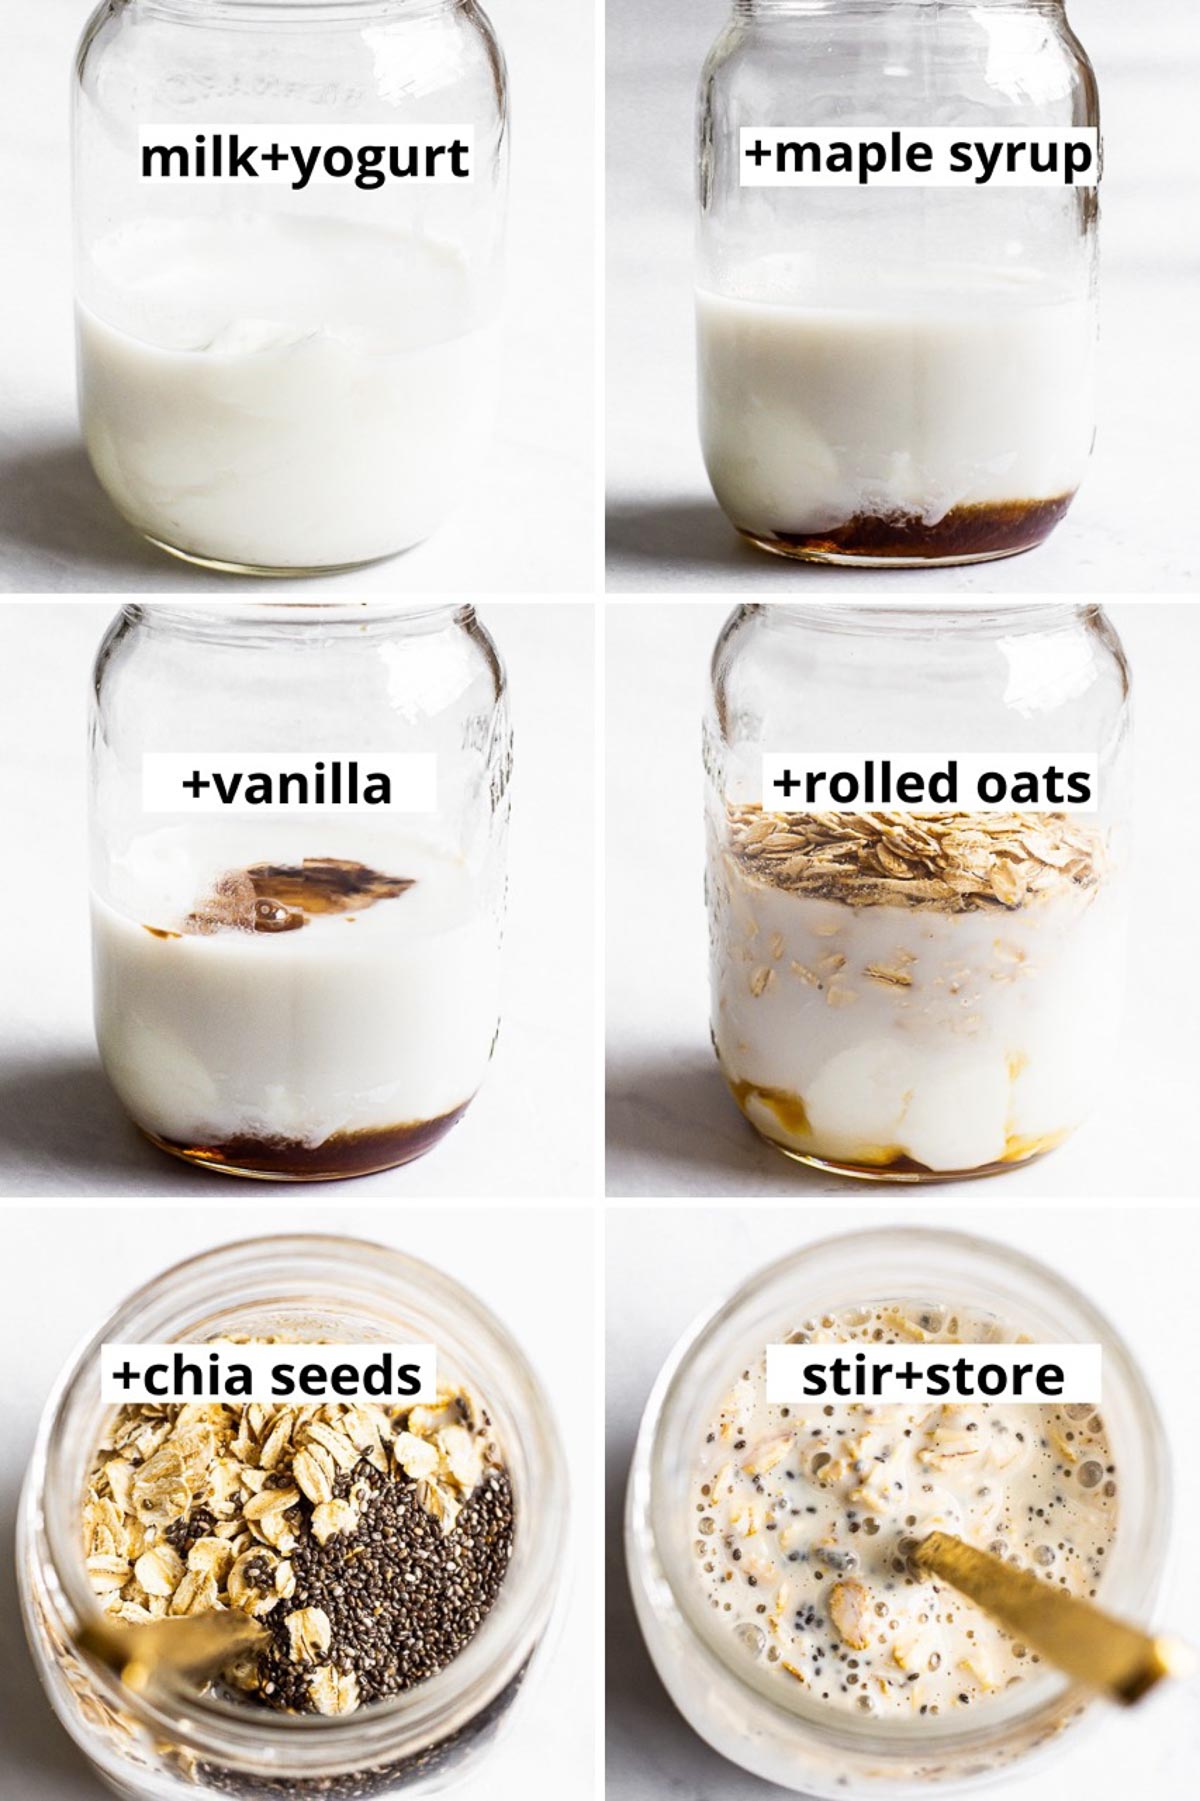 Mason jars with milk, yogurt, maple syrup, vanilla, rolled oats, chia seeds and then stirred with spoon.